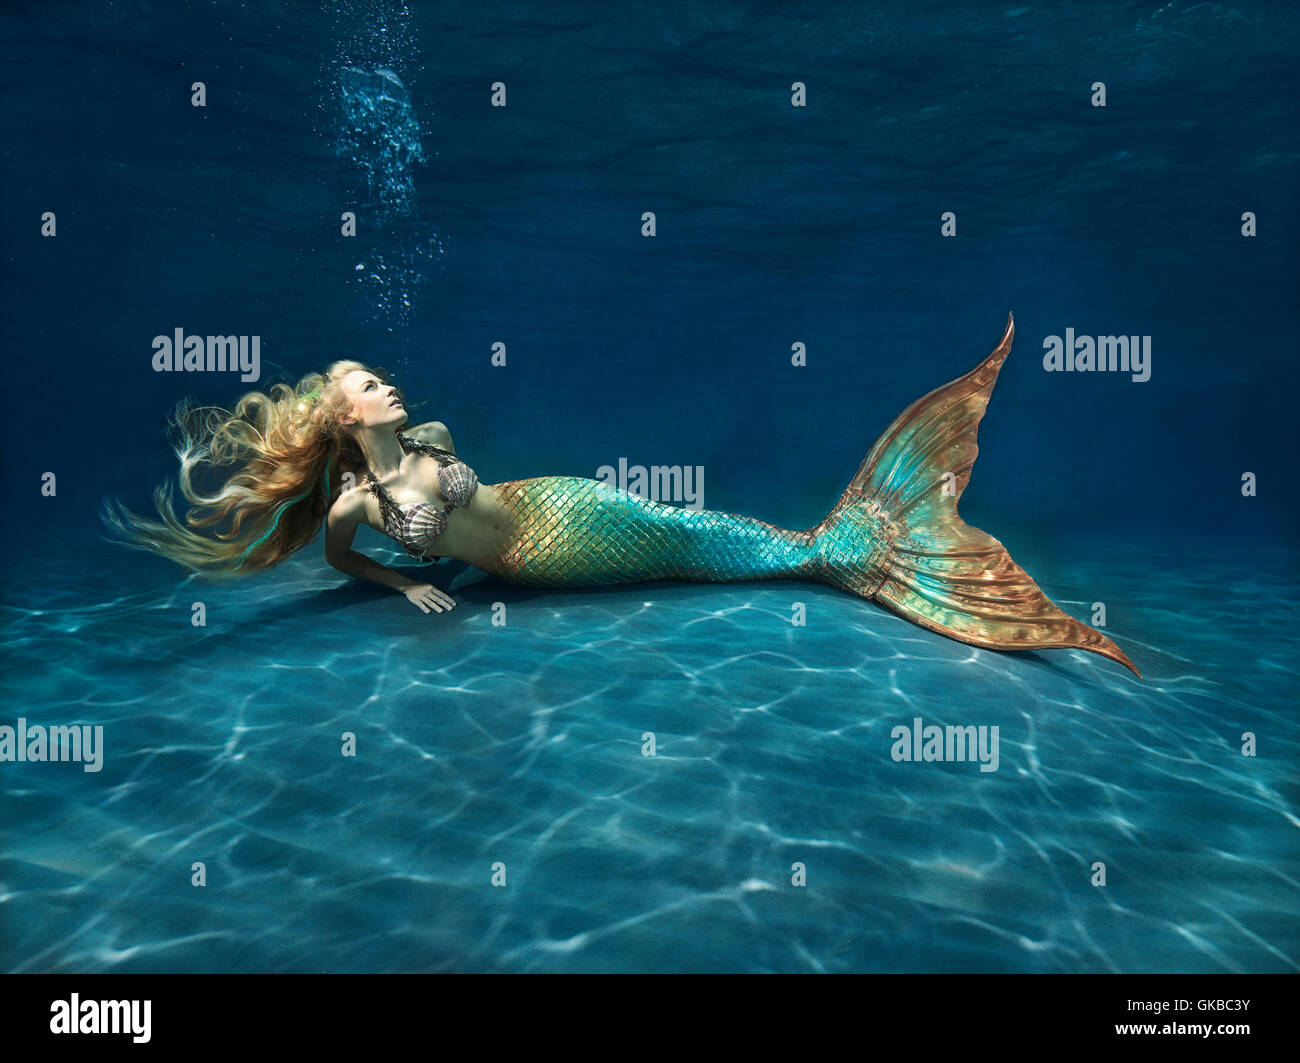 Young blonde mermaid laying on the ocean floor Stock Photo